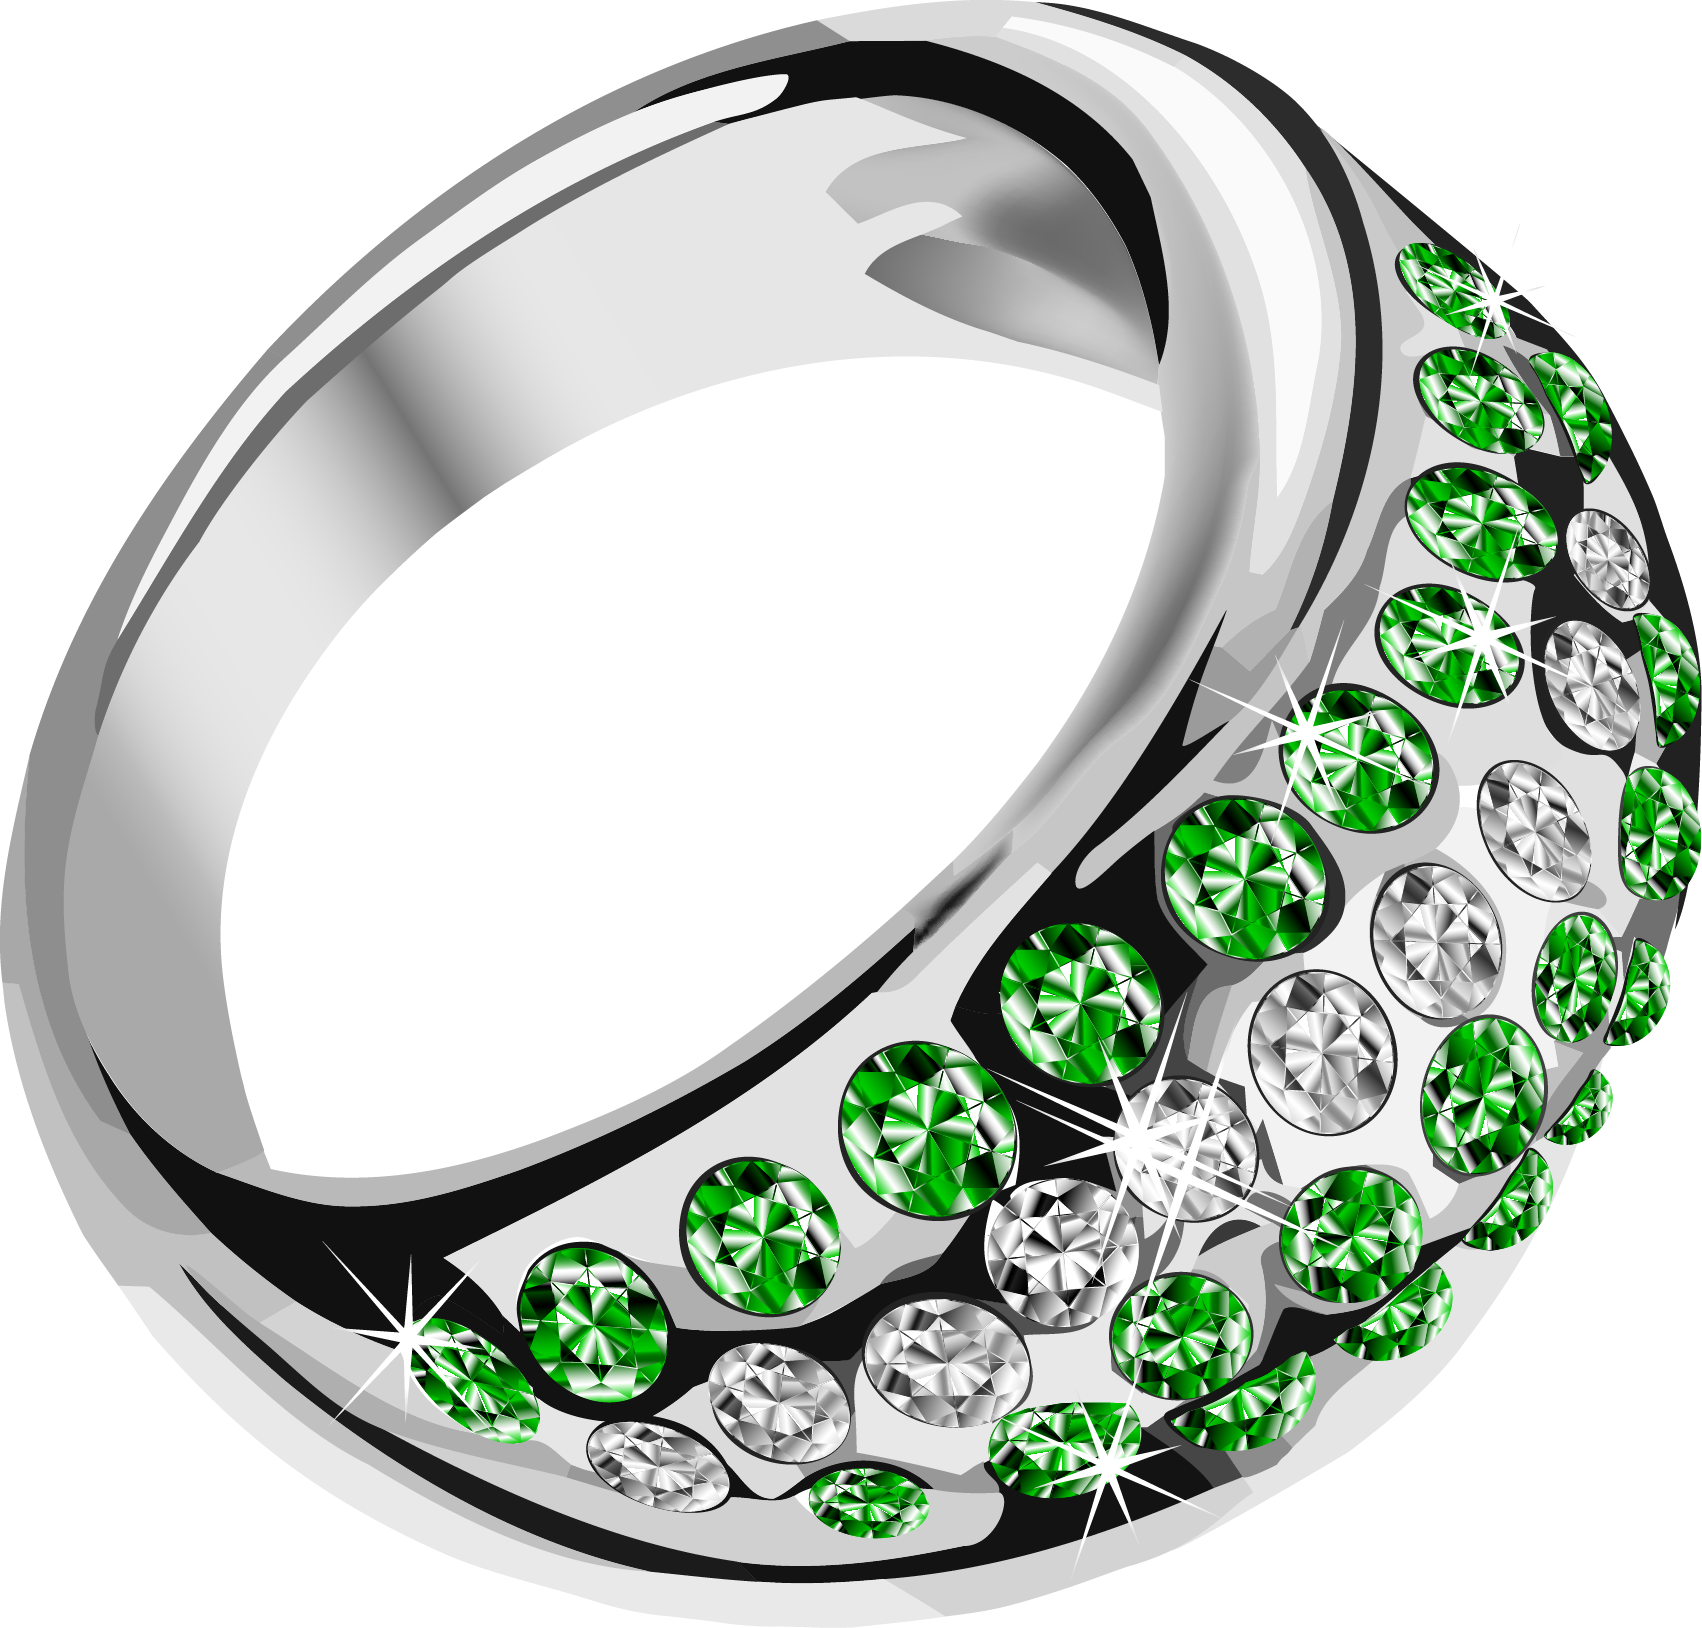 Silver Ring With Diamonds Png - Ring (1702x1628)